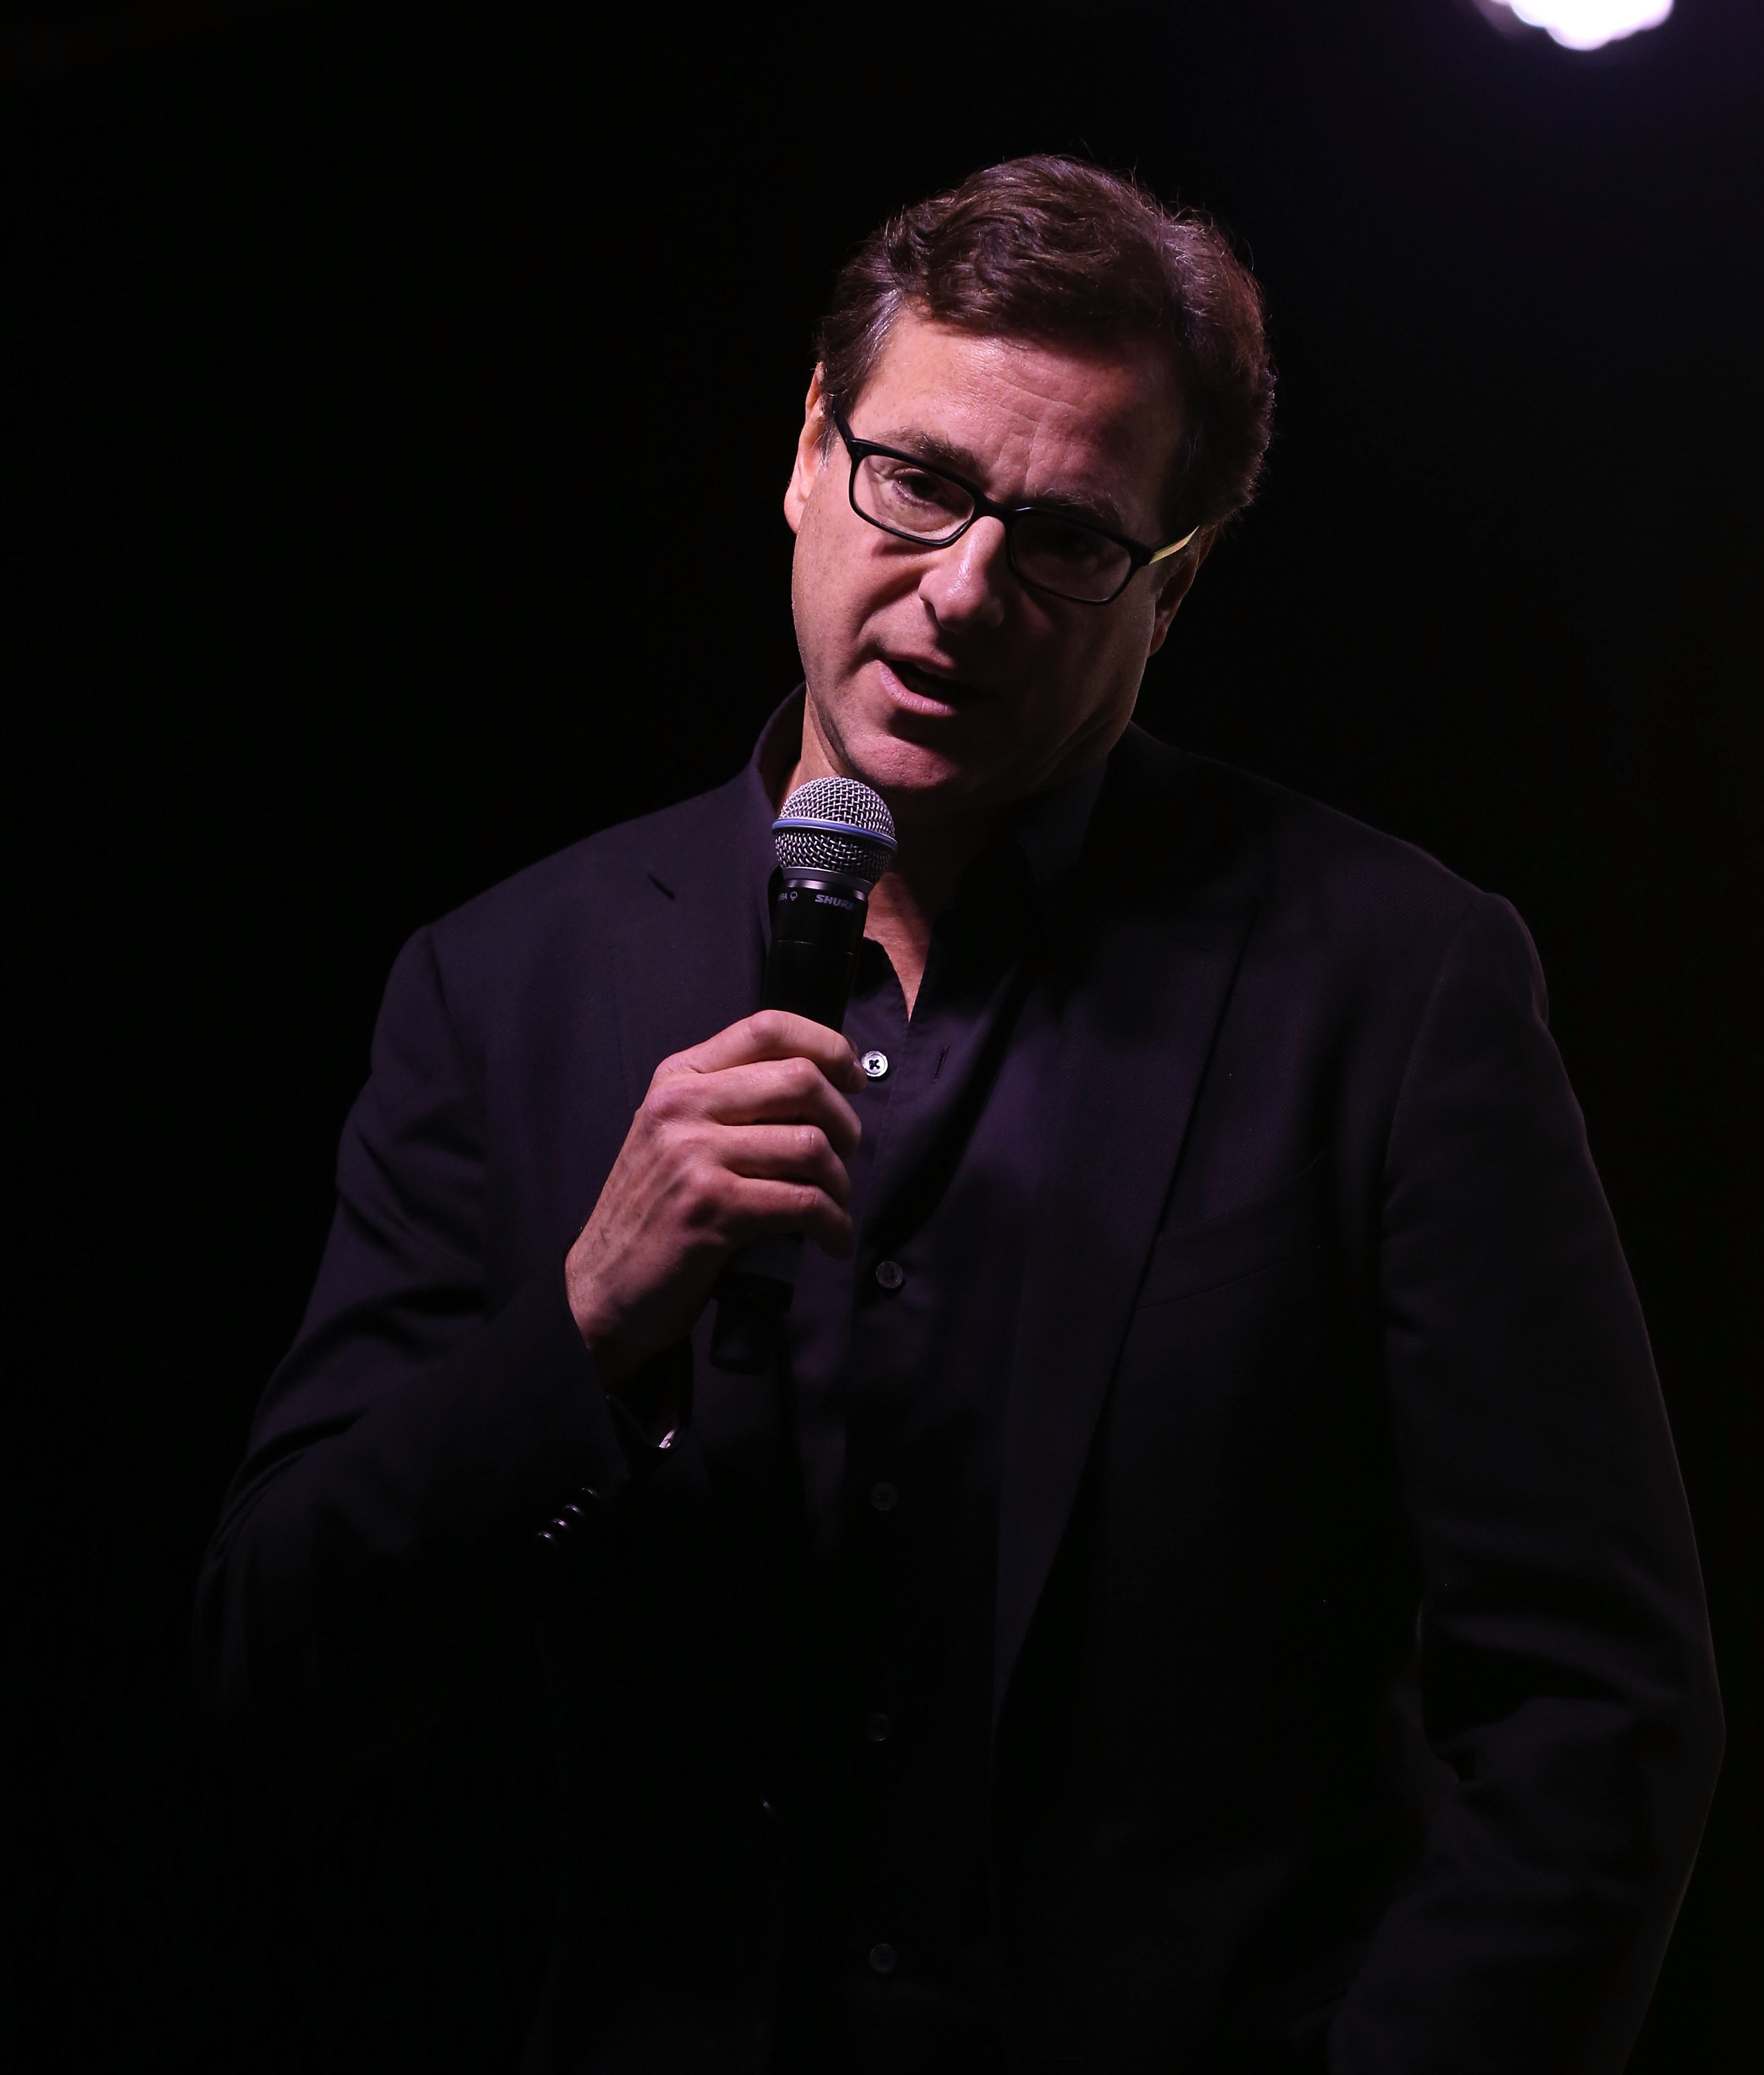 Bob Saget performs on stage at Li,ve Your Passion Celebrity Benefit at The Venetian Las Vegas on November 15, 2014 in Las Vegas, Nevada. | Source: Getty Images